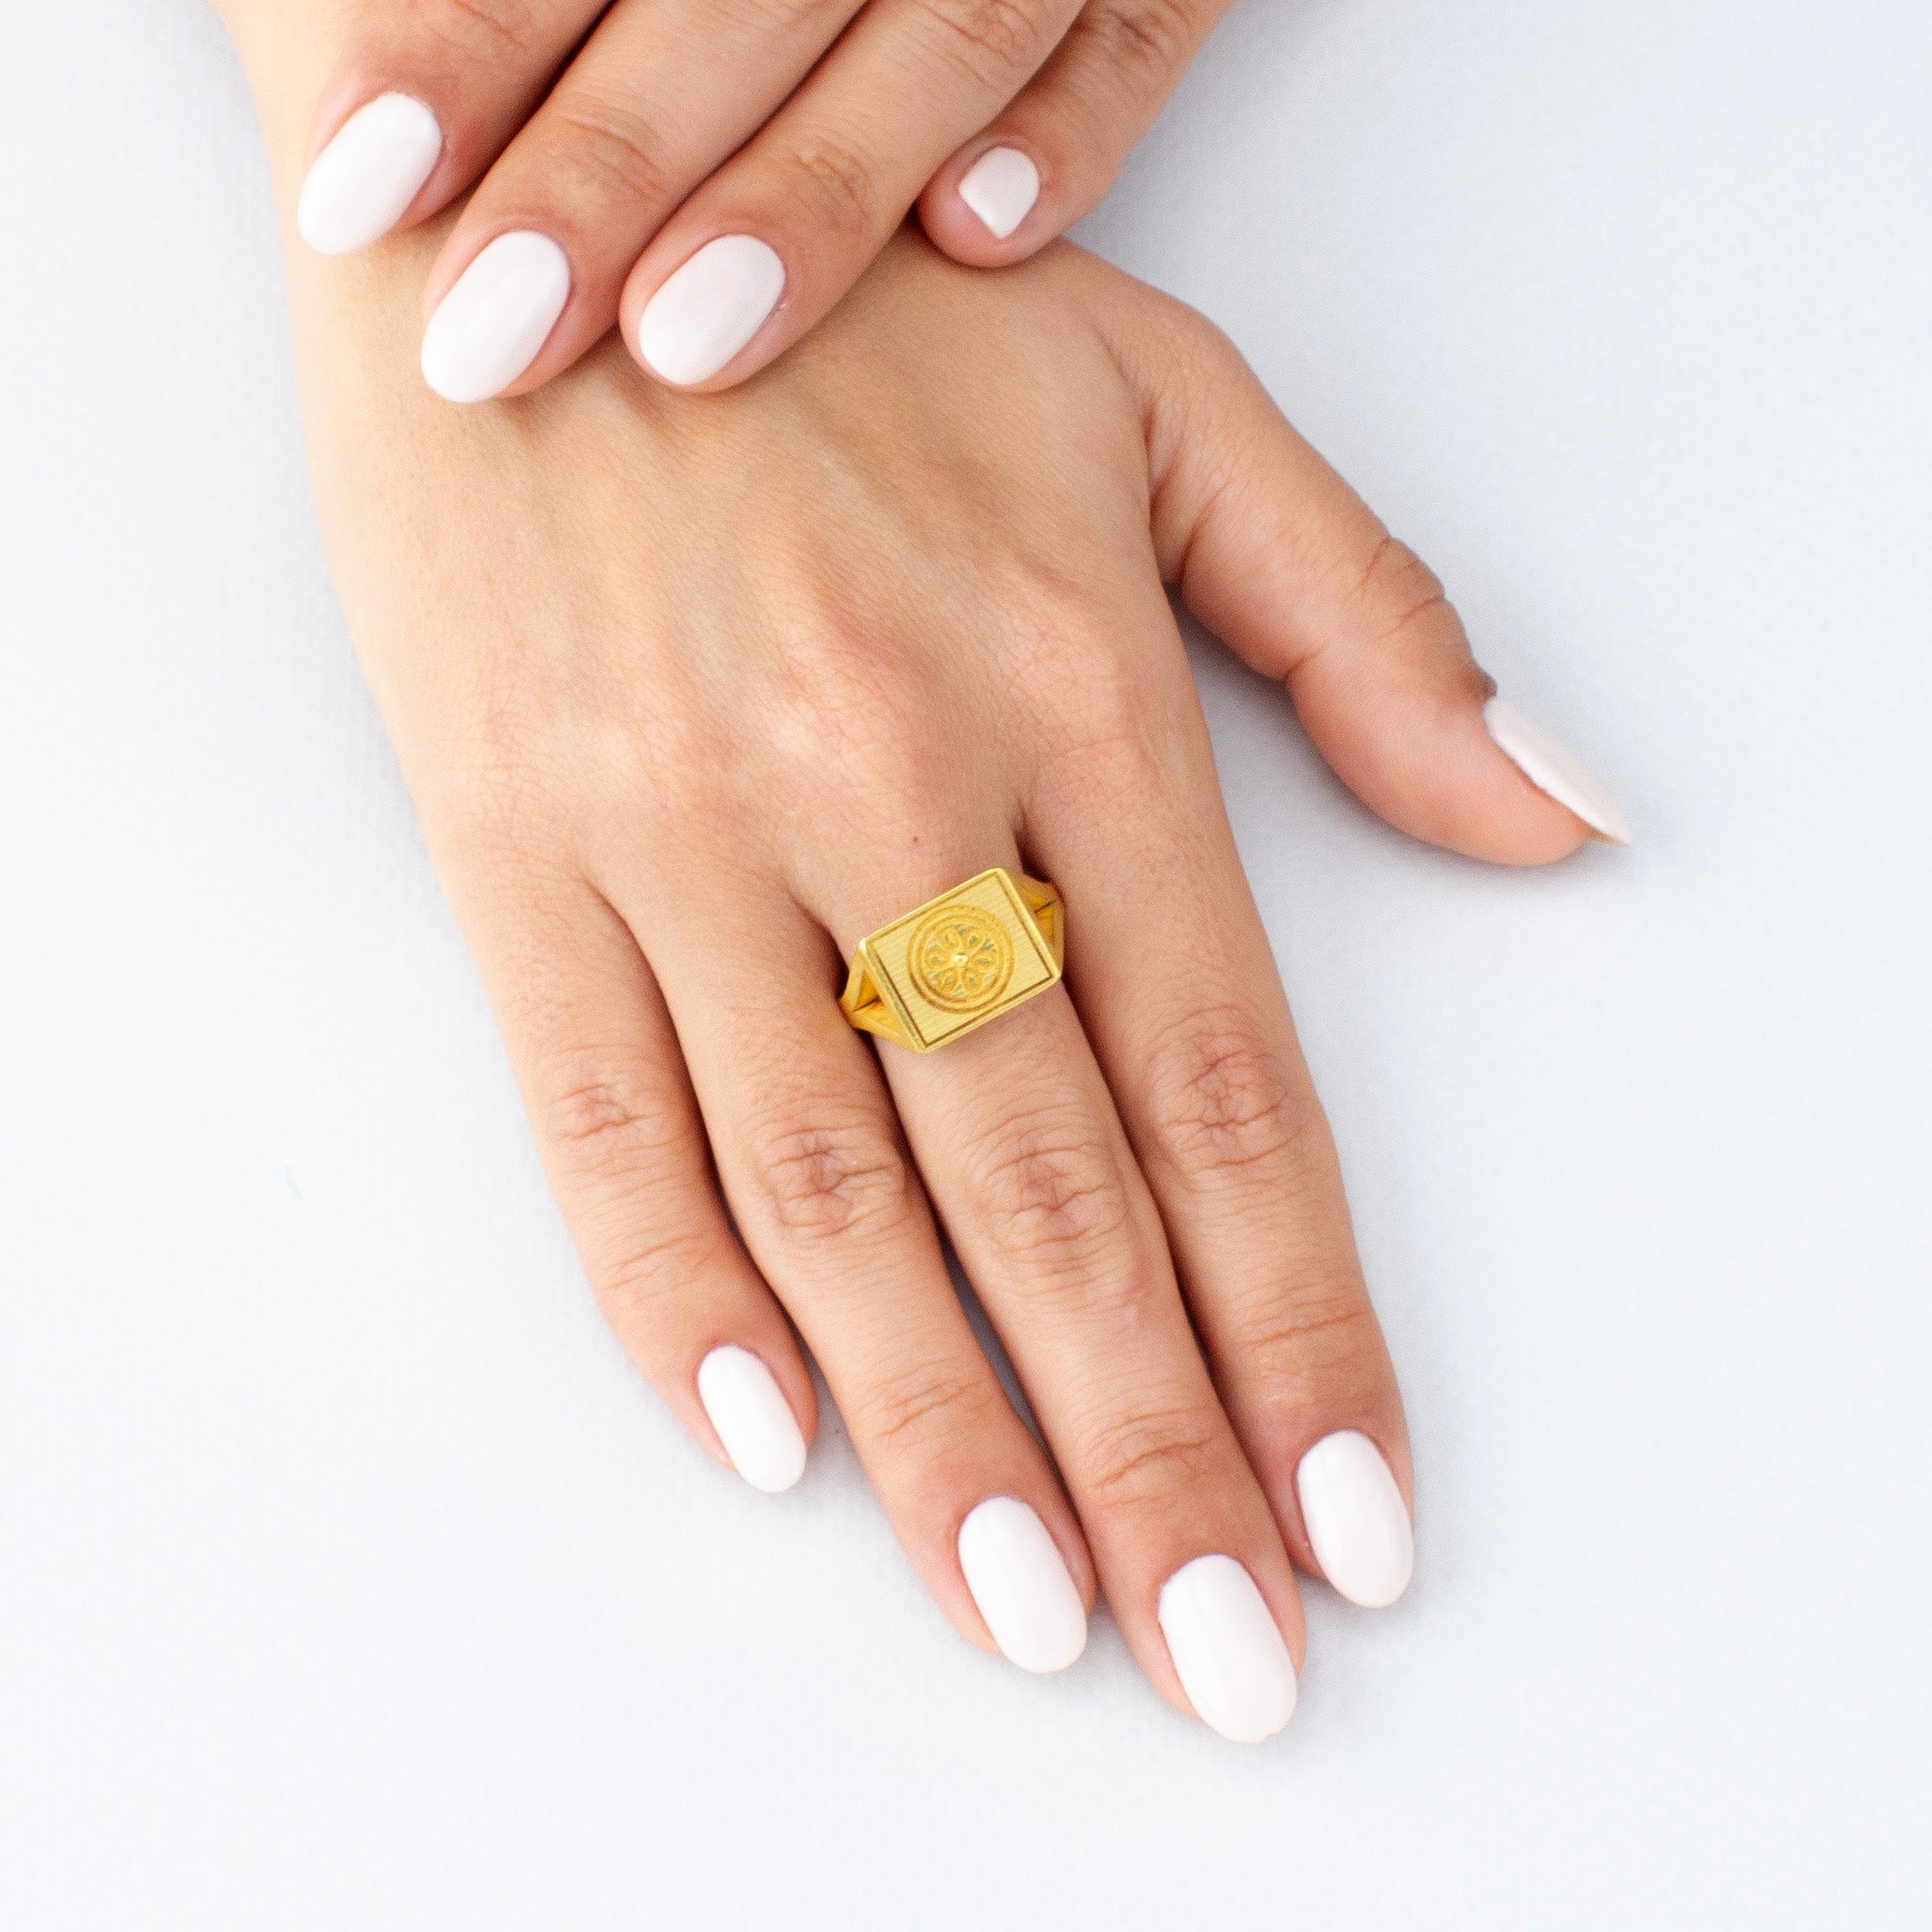 Model displaying an Elegant 18k gold signet ring with a square top featuring an embossed flower design, showcased against a reflective white background.